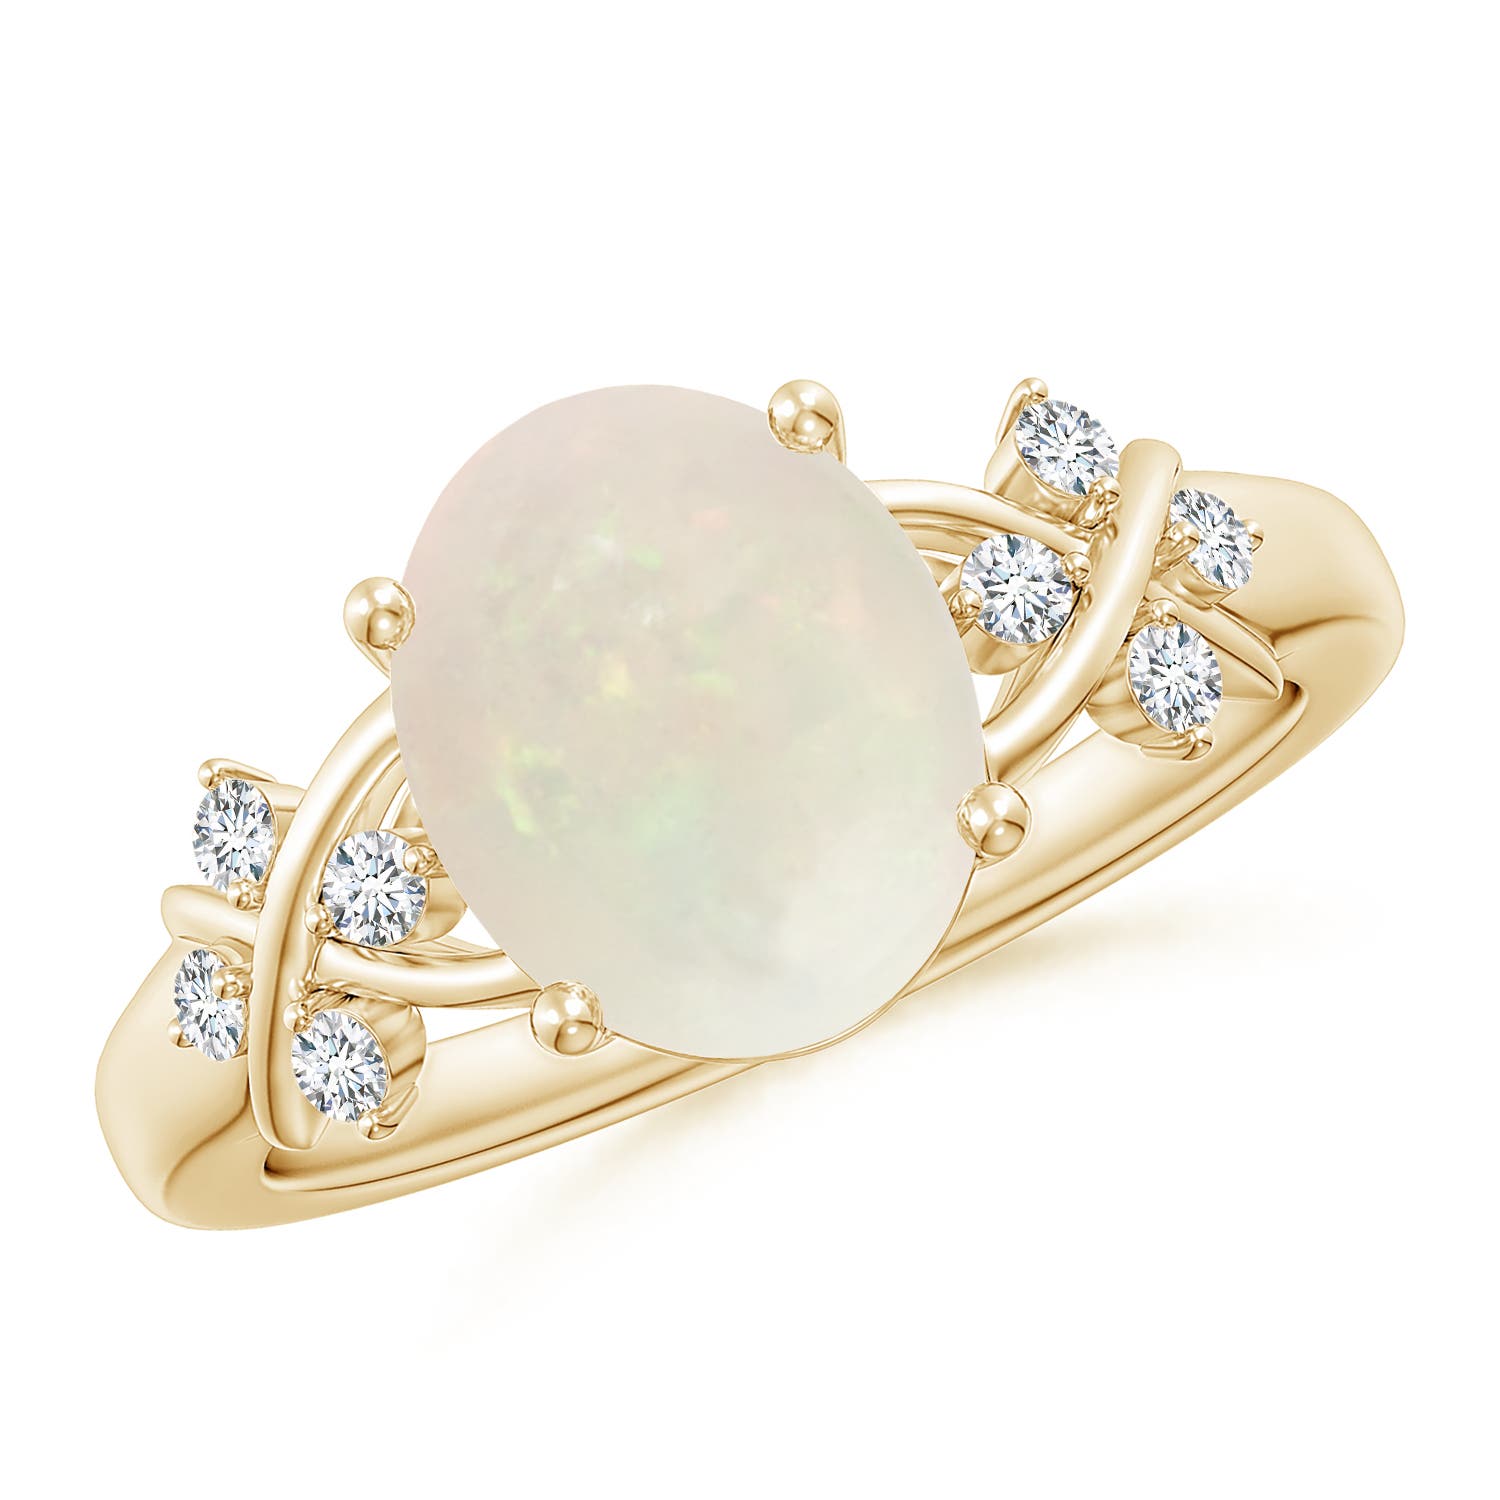 A - Opal / 1.62 CT / 14 KT Yellow Gold